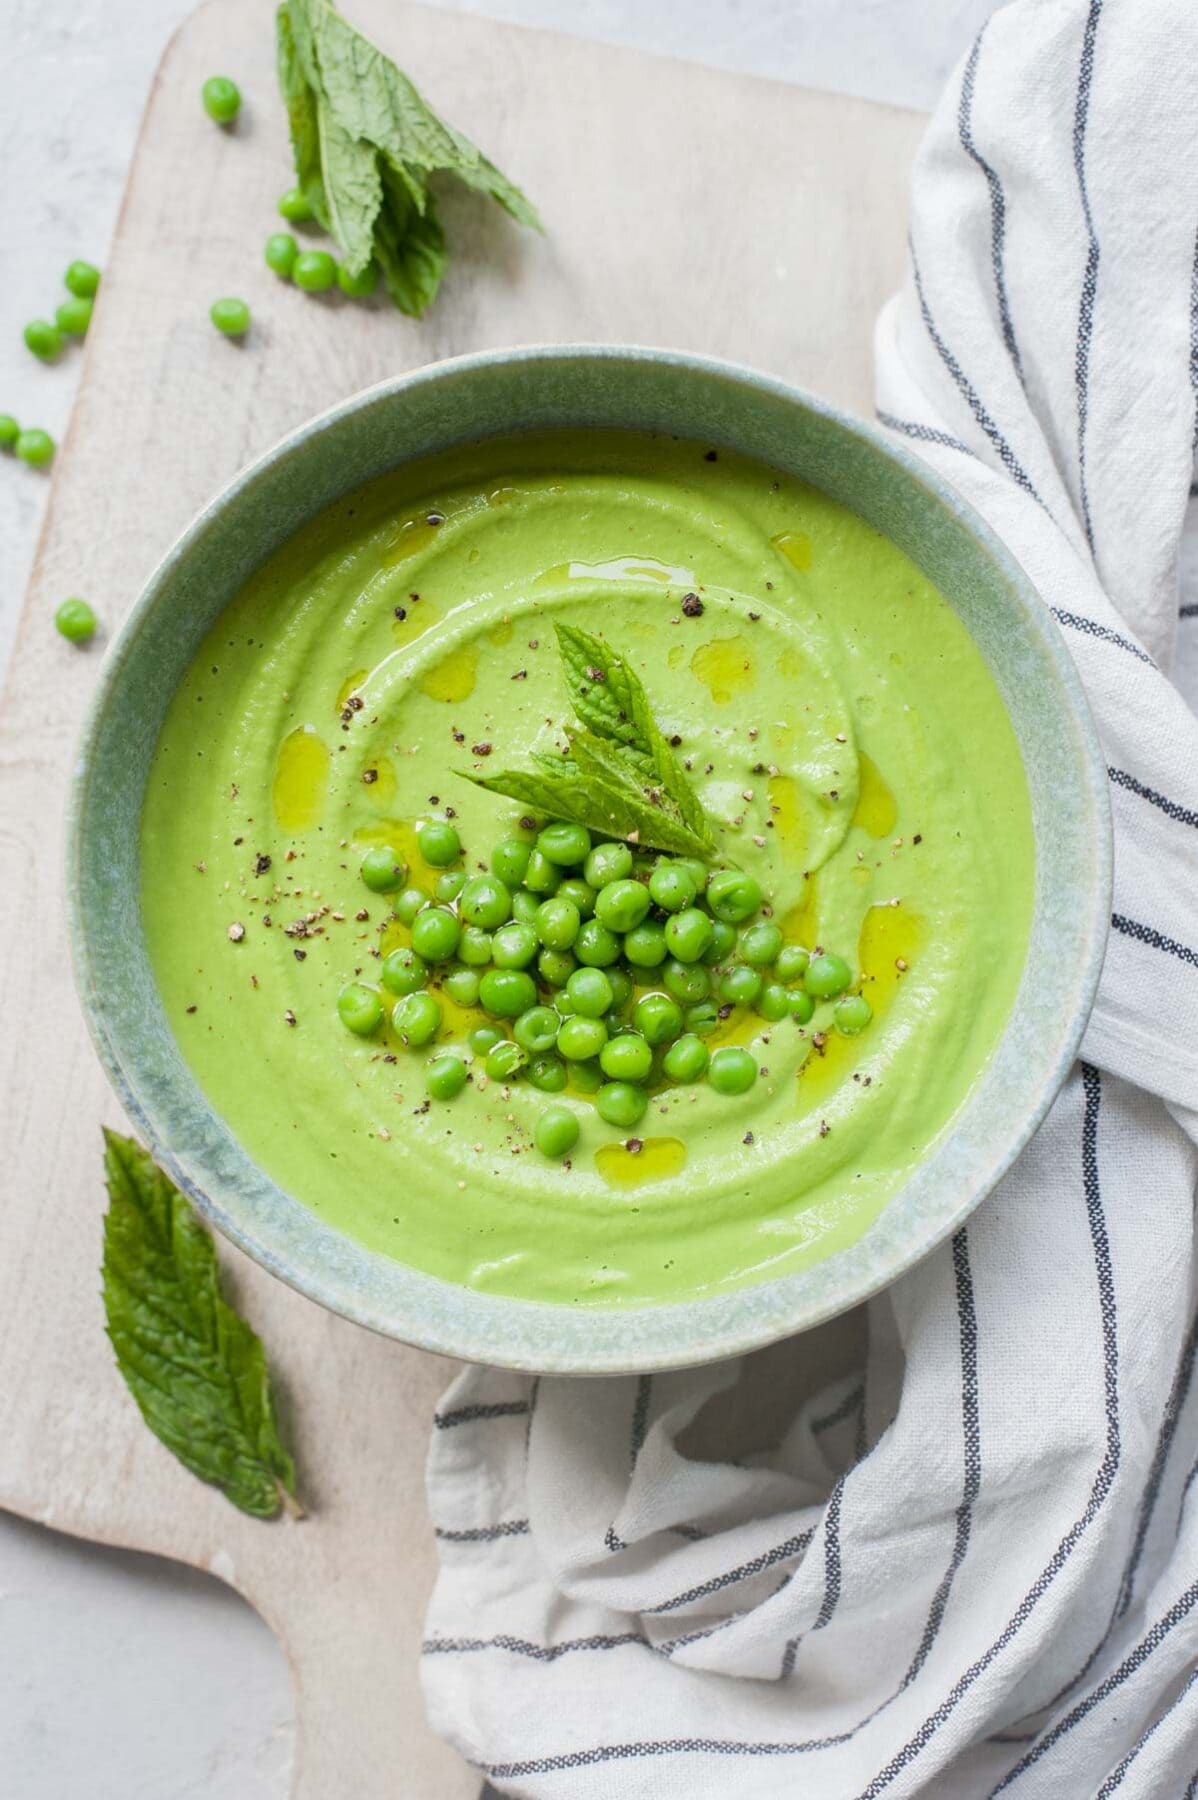 Pea mint puree in a green bowl topped with peas and mint leaves.